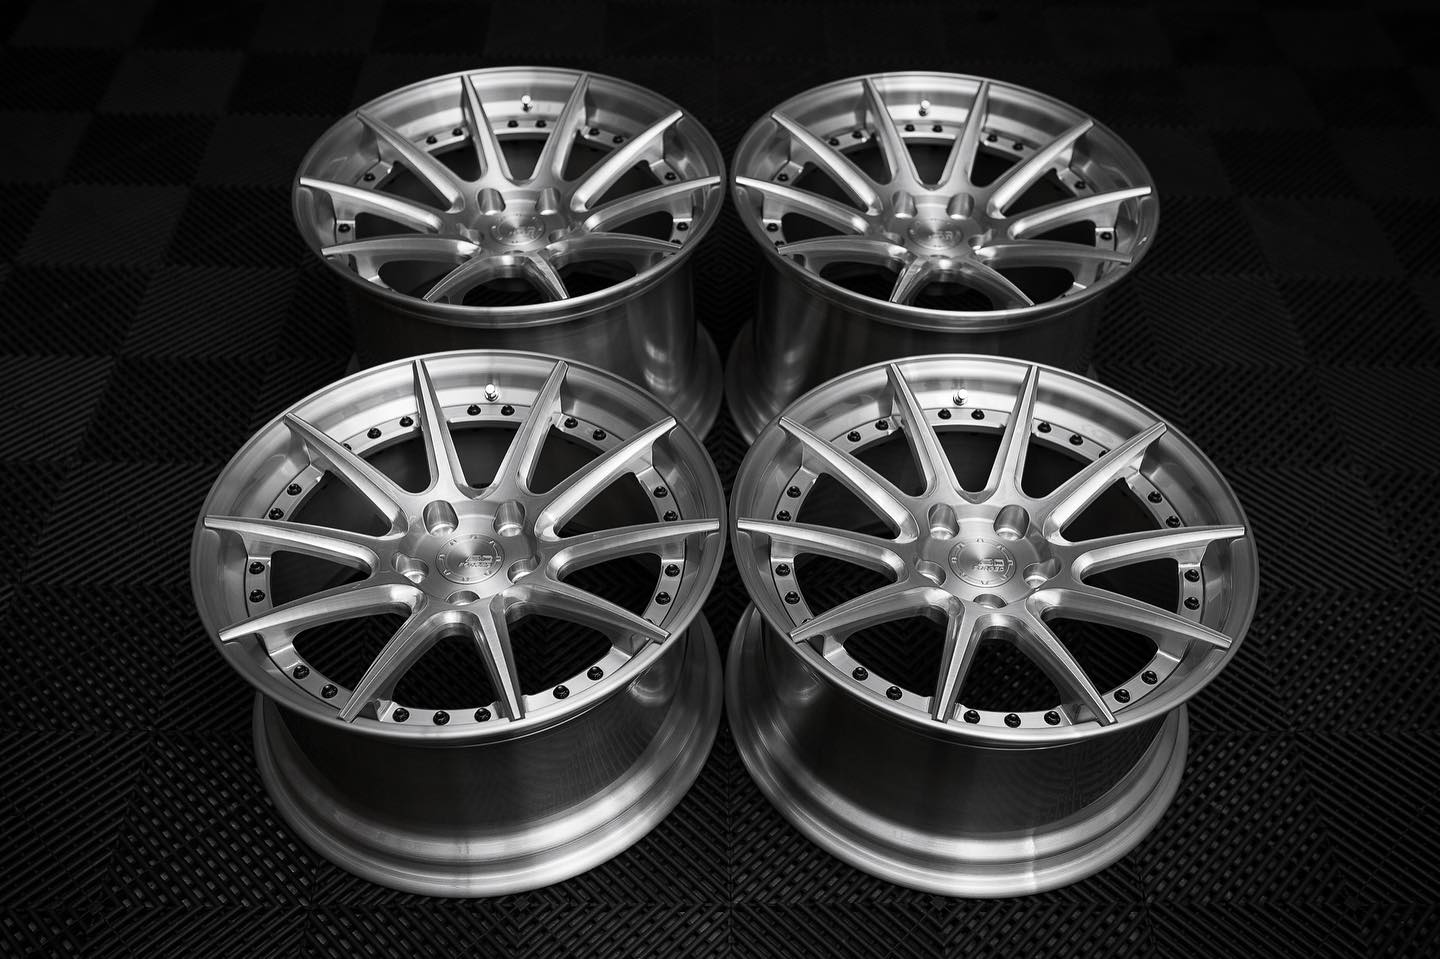 S650 Mustang Authorized Dealer BC Forged Wheels: Monoblock And Modular Series Wheels For Mustang S650 393170489_18379449661064104_3496588580820265056_n